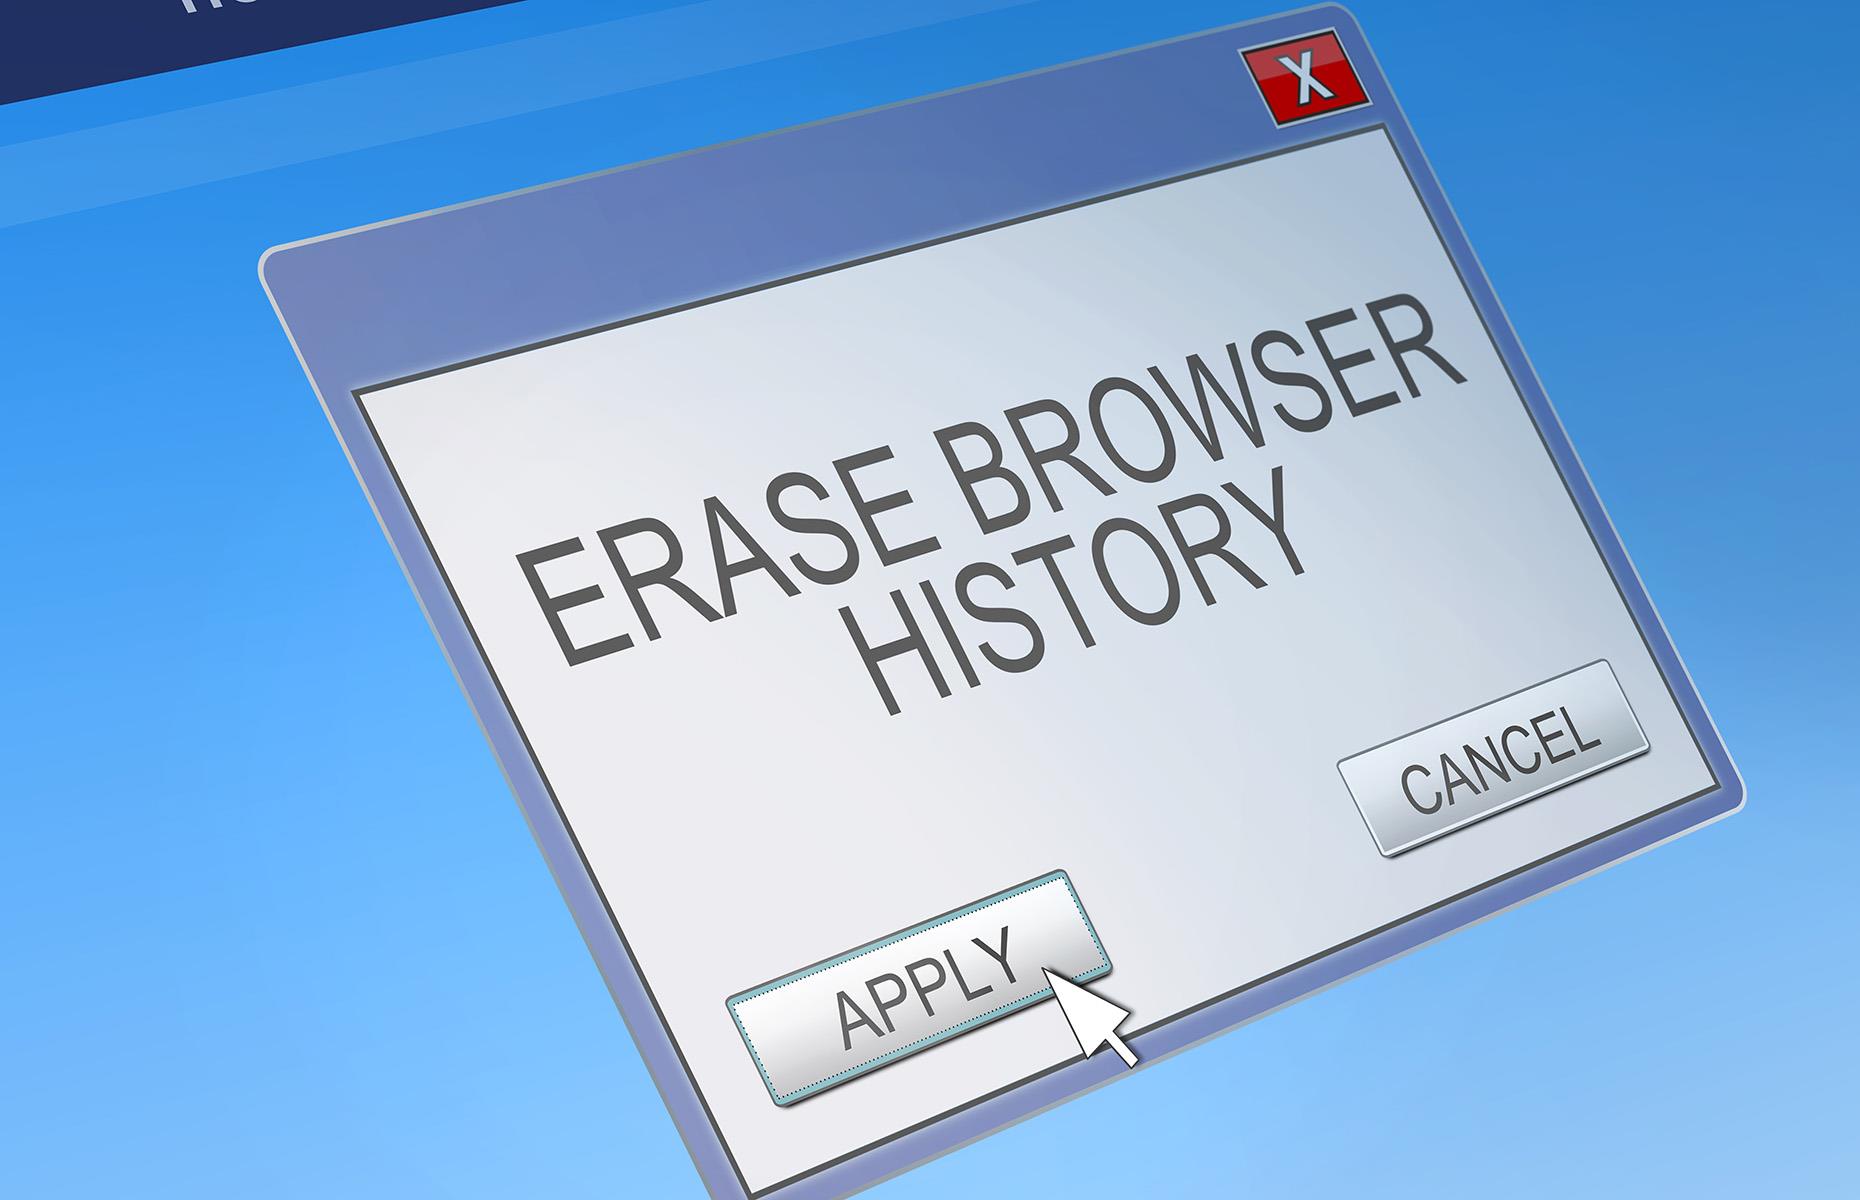 We don't clear our browser history